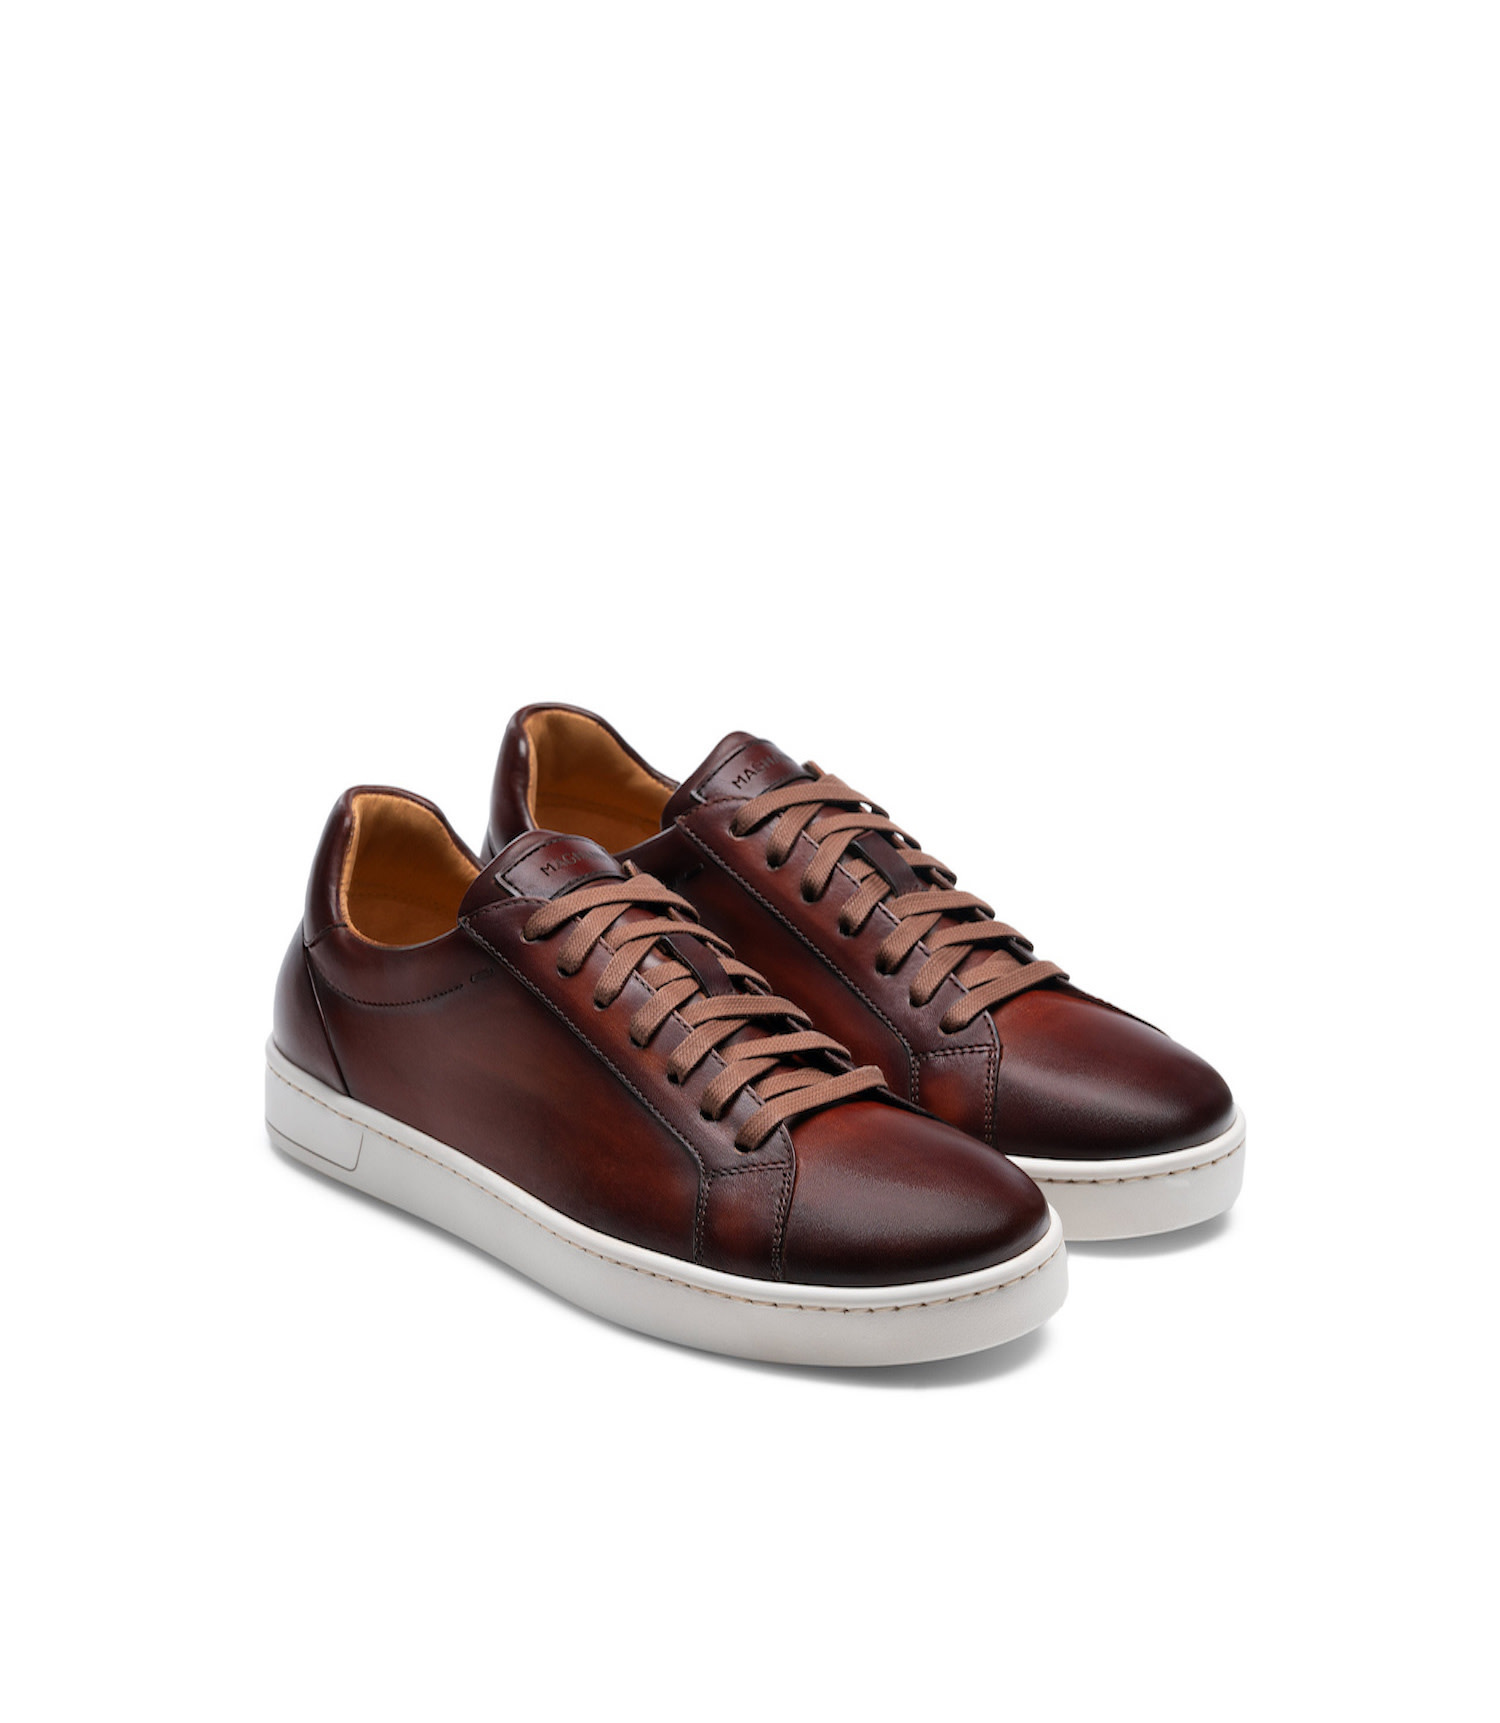 magnanni shoes sneakers